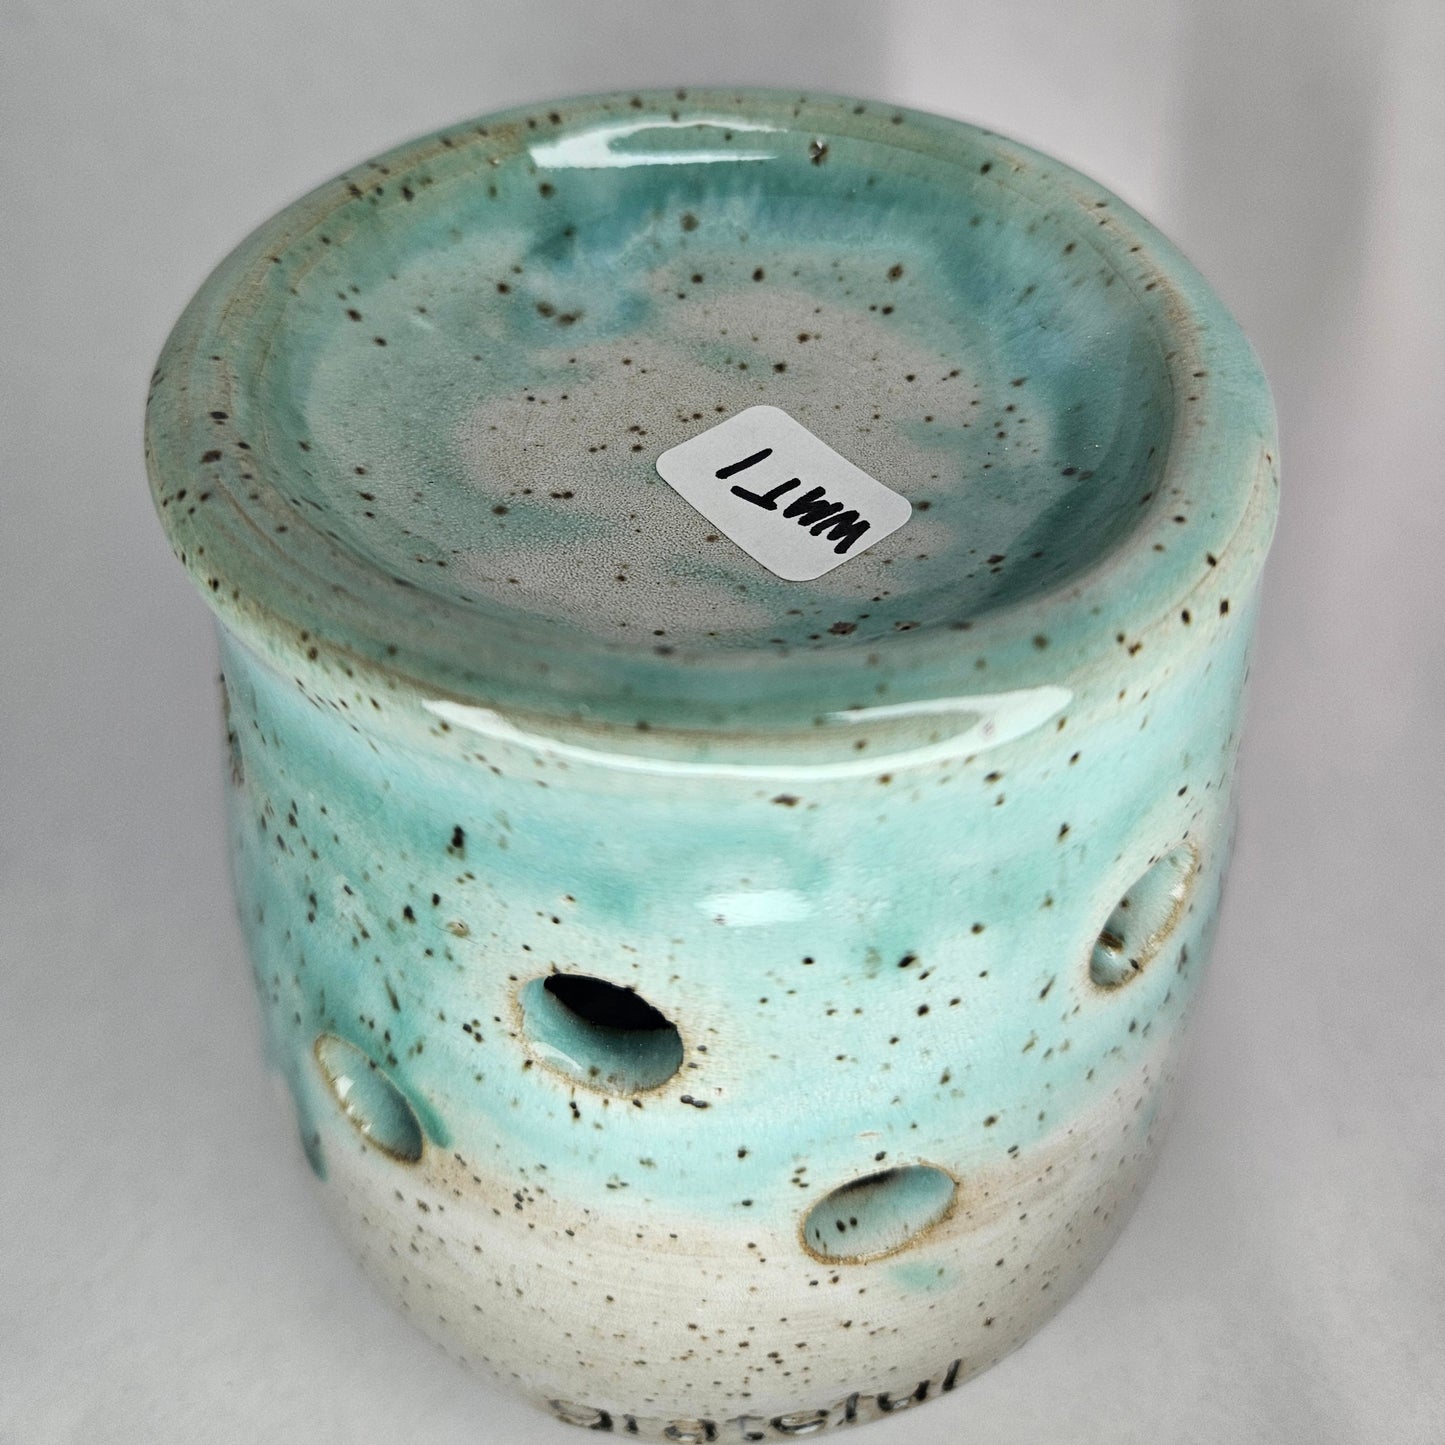 Wax Melter - grateful - White and Teal